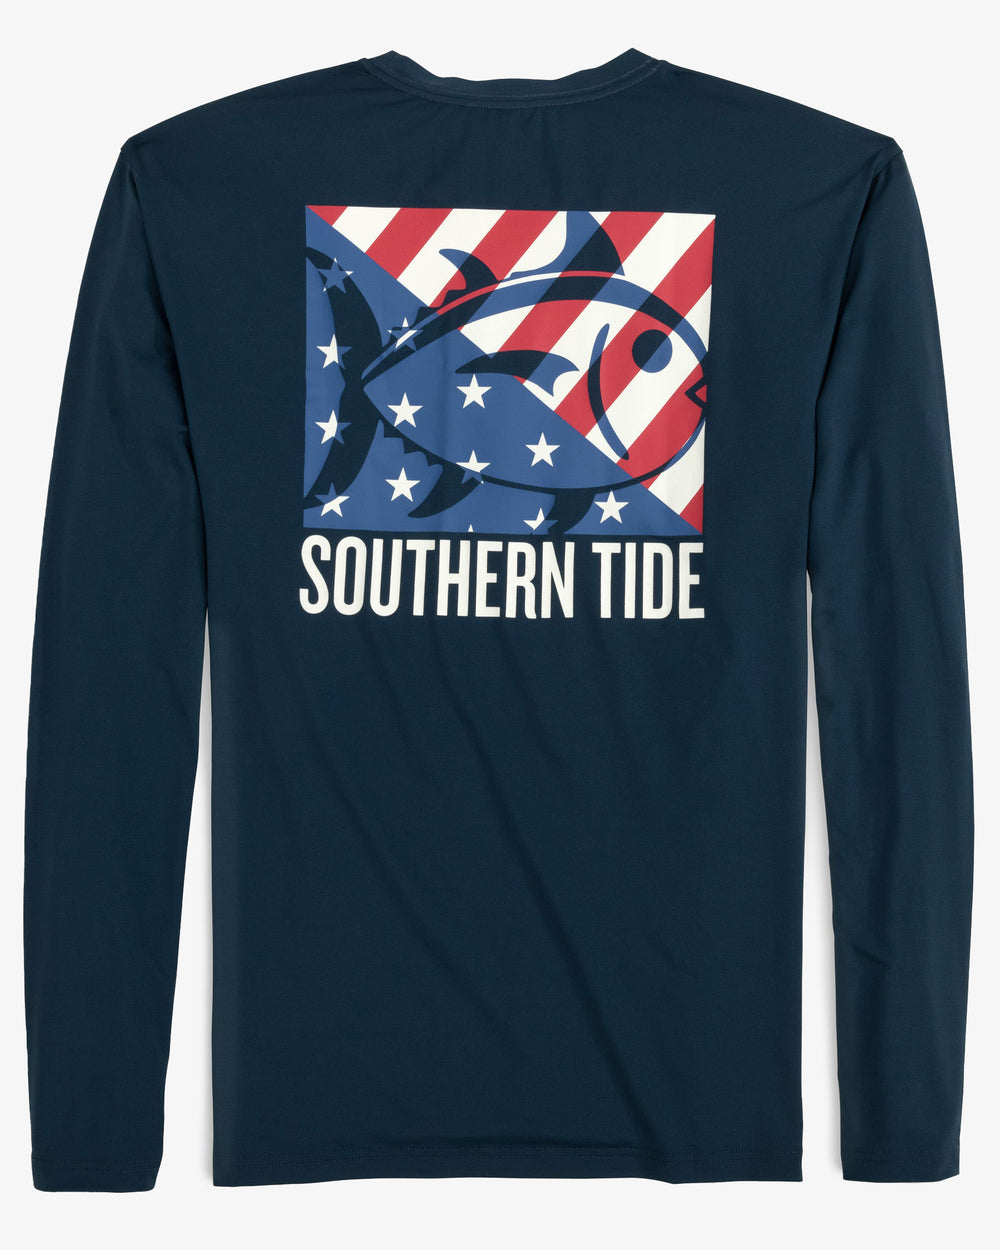 The back view of the Men's Flag Cutout Long Sleeve Performance T-Shirt by Southern Tide - Specular Blue